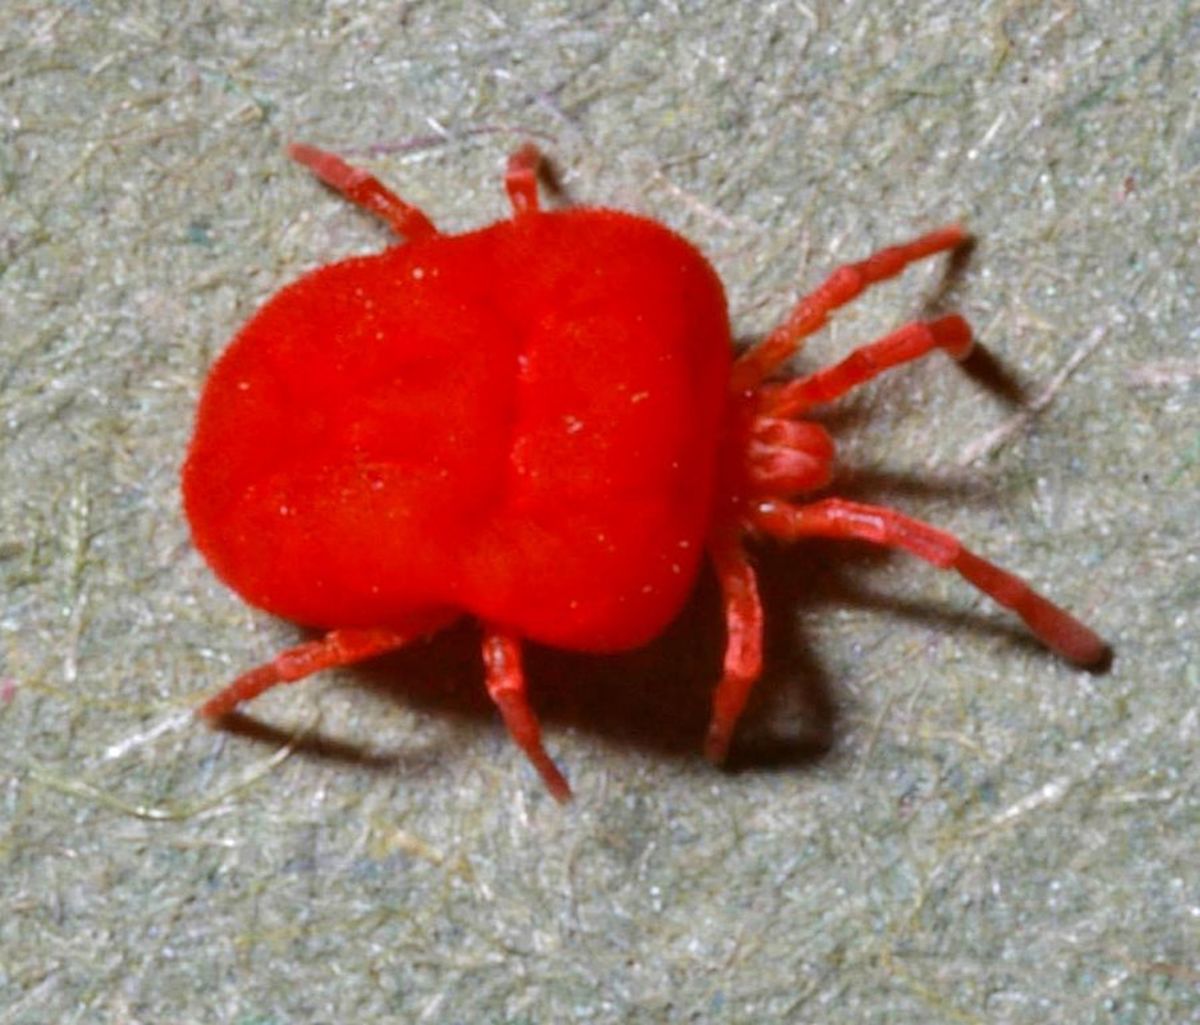 Mites can cause itchy sore feet